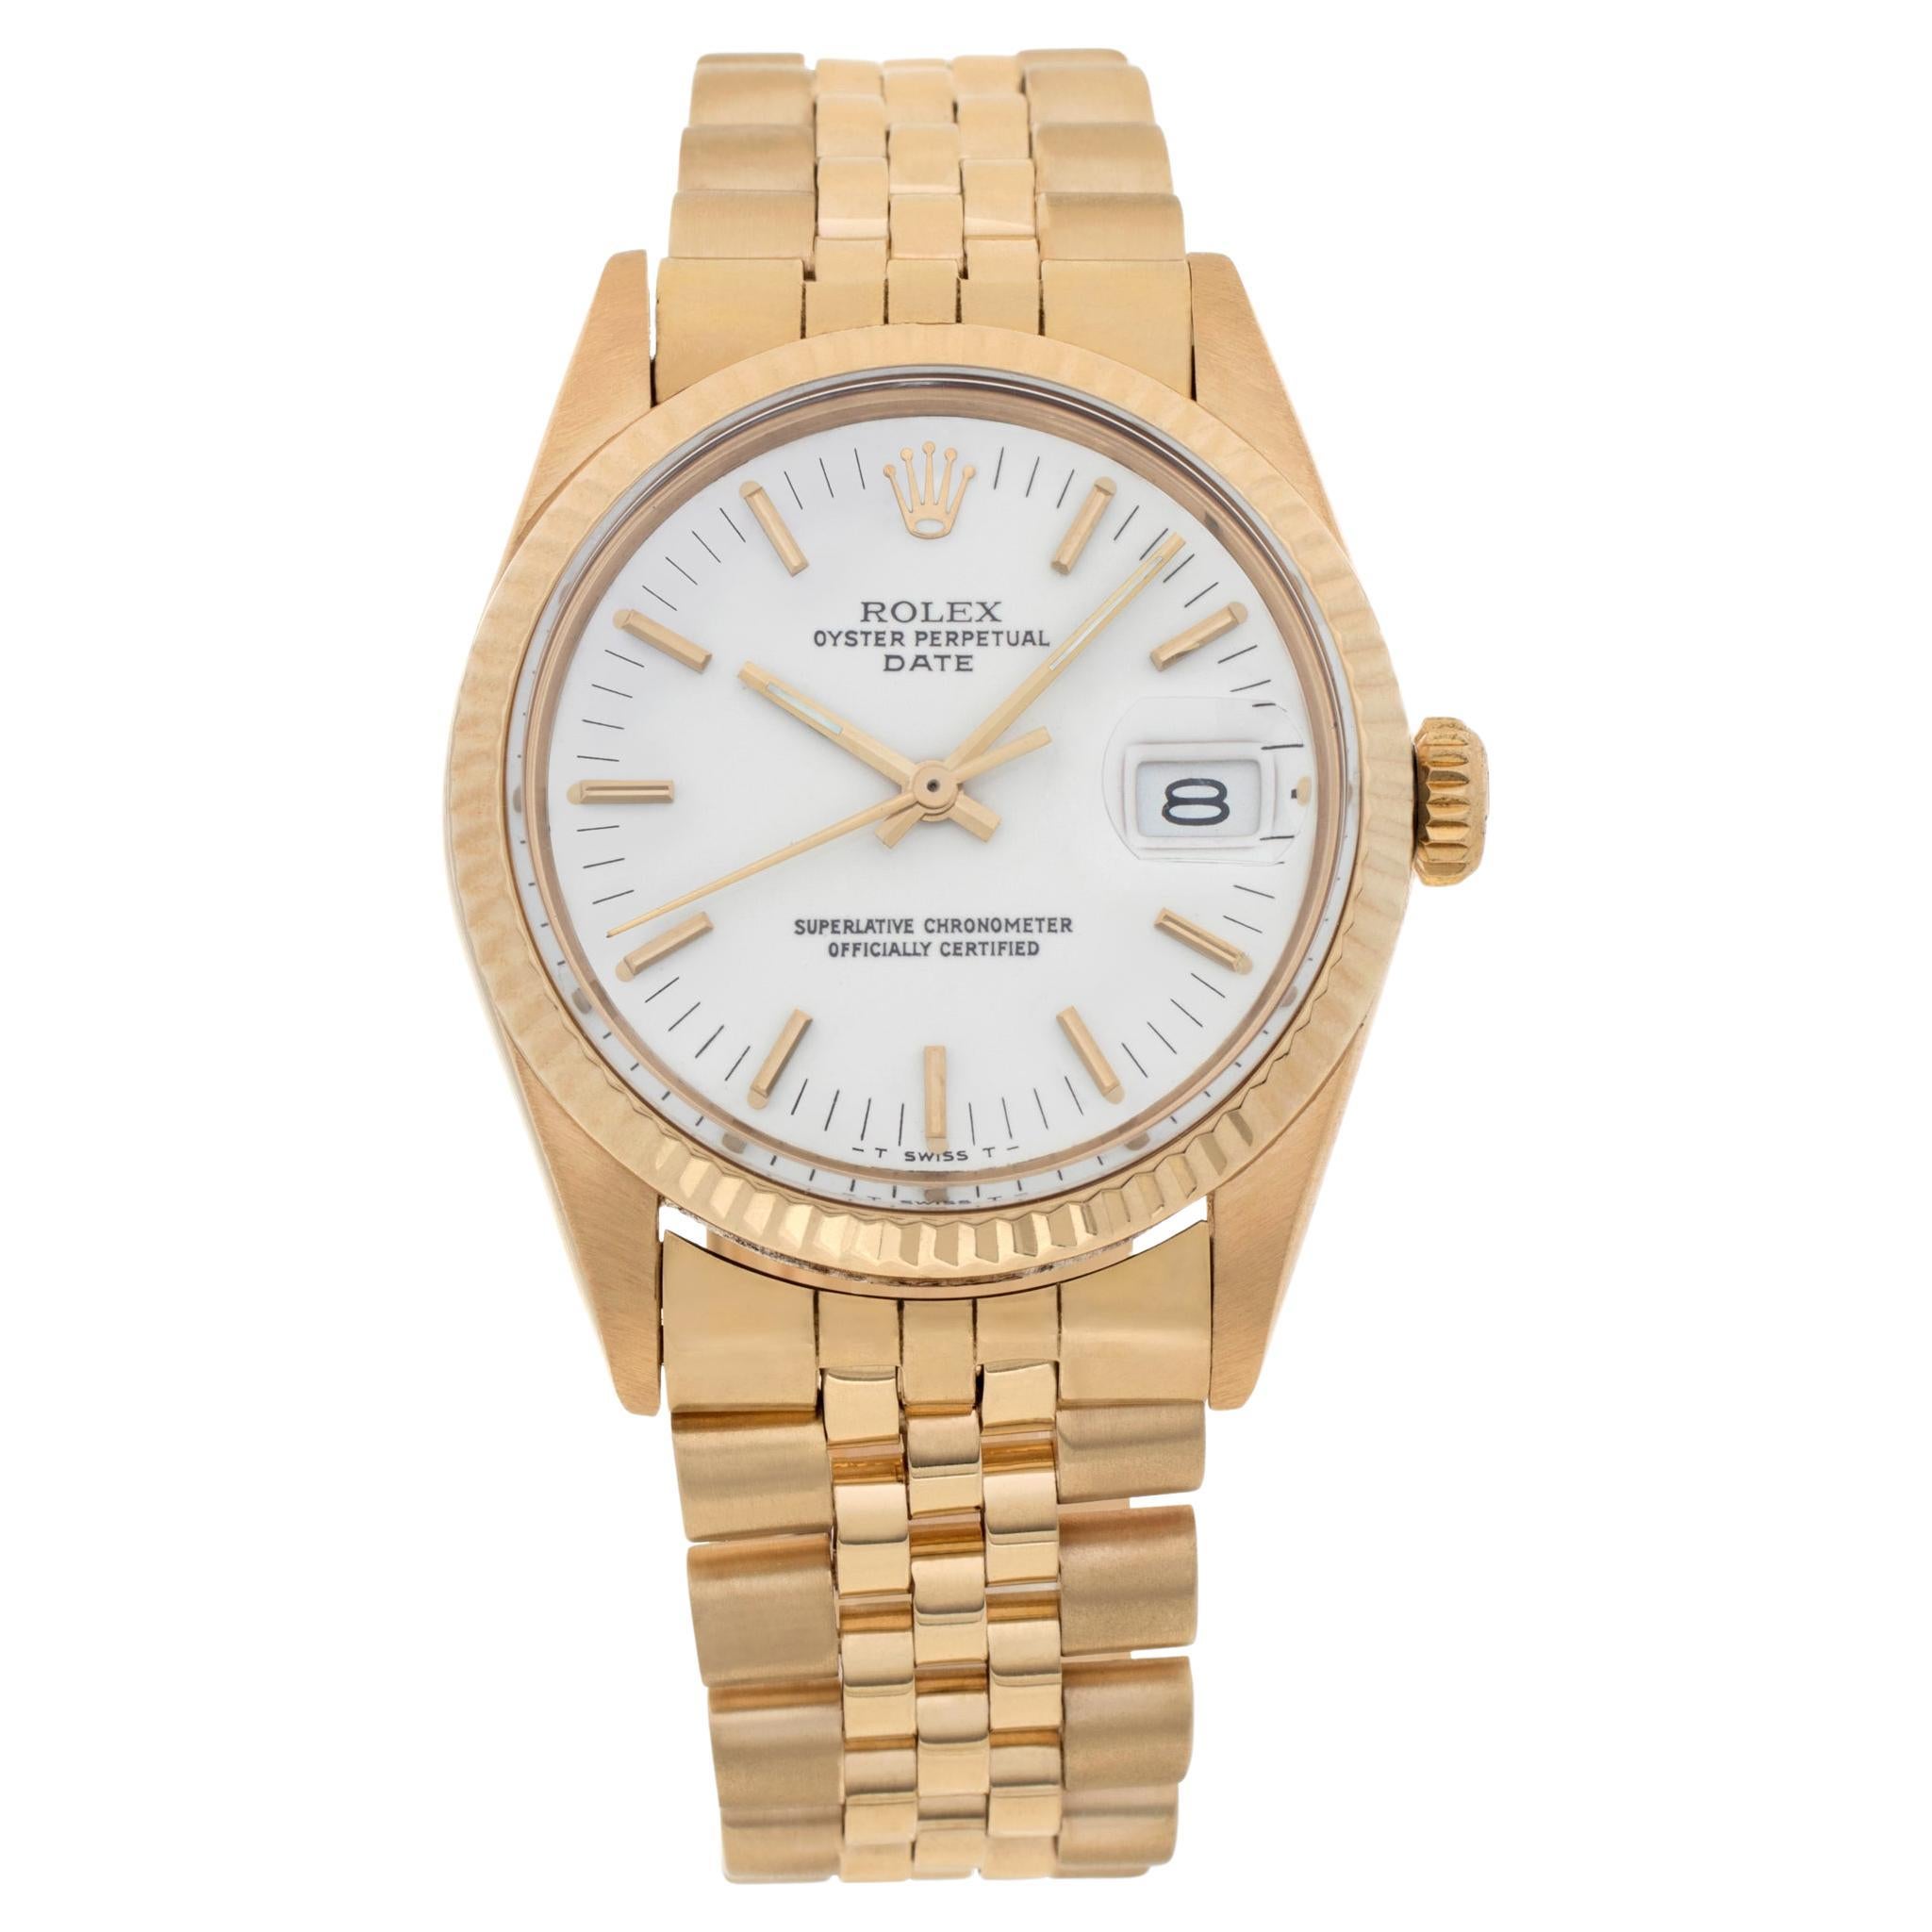 Rolex Date 15038 in yellow gold with a White dial 34mm Automatic watch